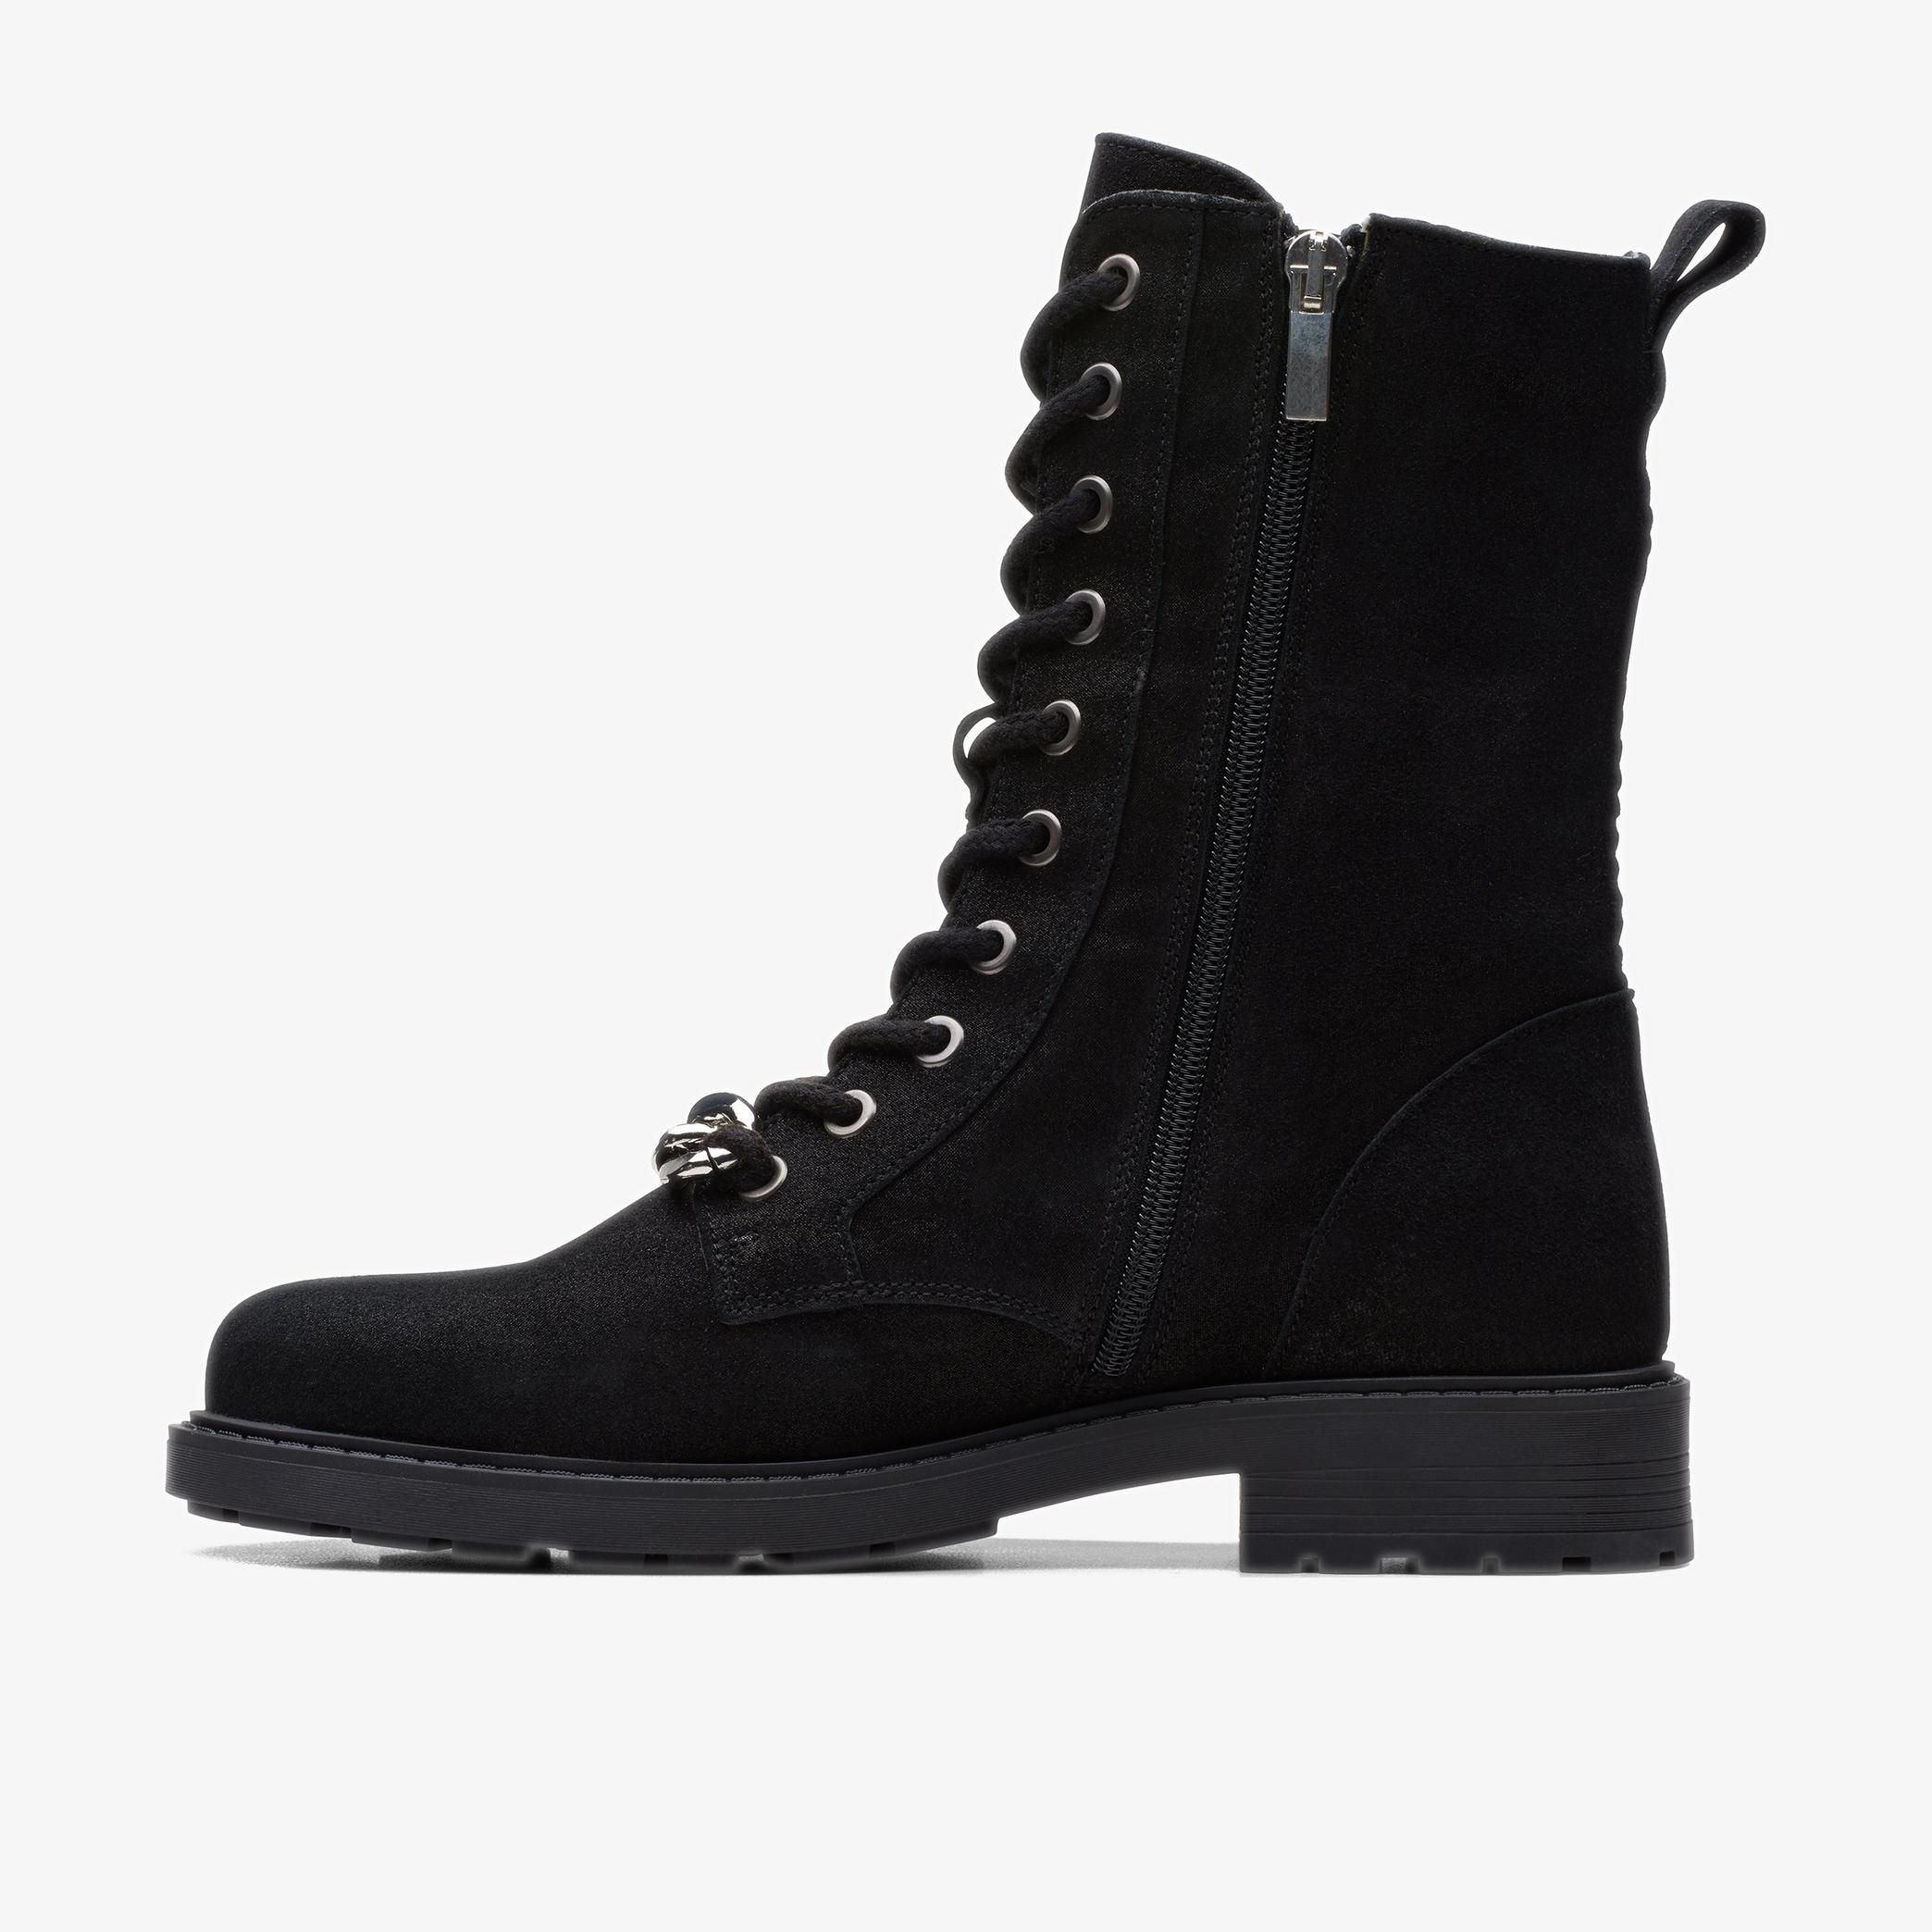 WOMENS Orinoco 2 Style Black Metallic Ankle Boots | Clarks Outlet